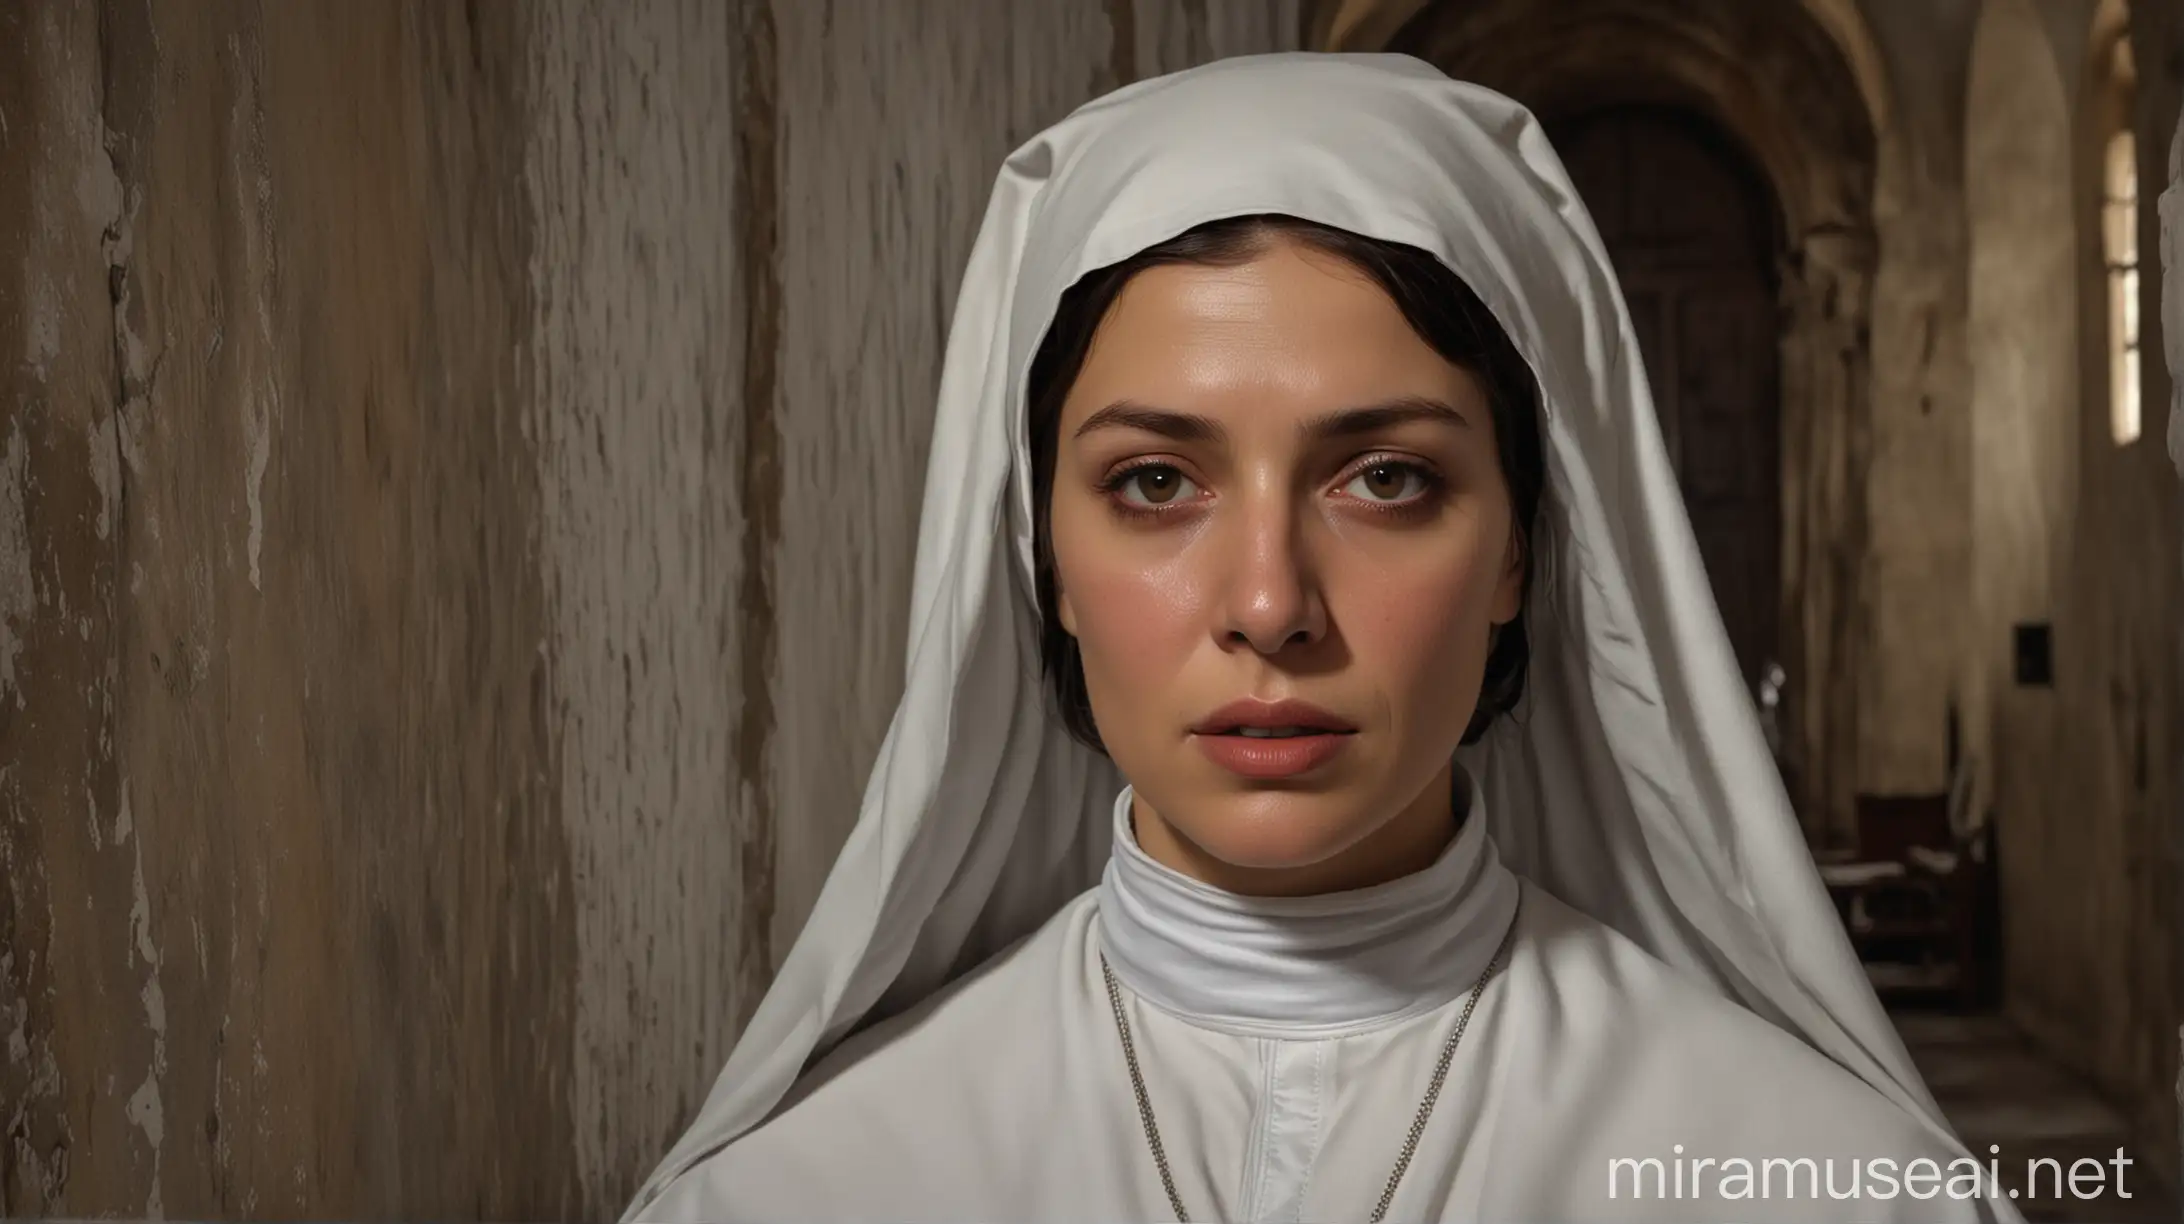 Italian woman of 50 years, brunette brown eyes and angelic full lips, 19th century, she is dressed as a Dominican nun, the hallways of the monastery of Santa Catalina in Taggia Italy, she has a spiritual vision and she  is crying, in her bedroom, frontal, hyperrealistic